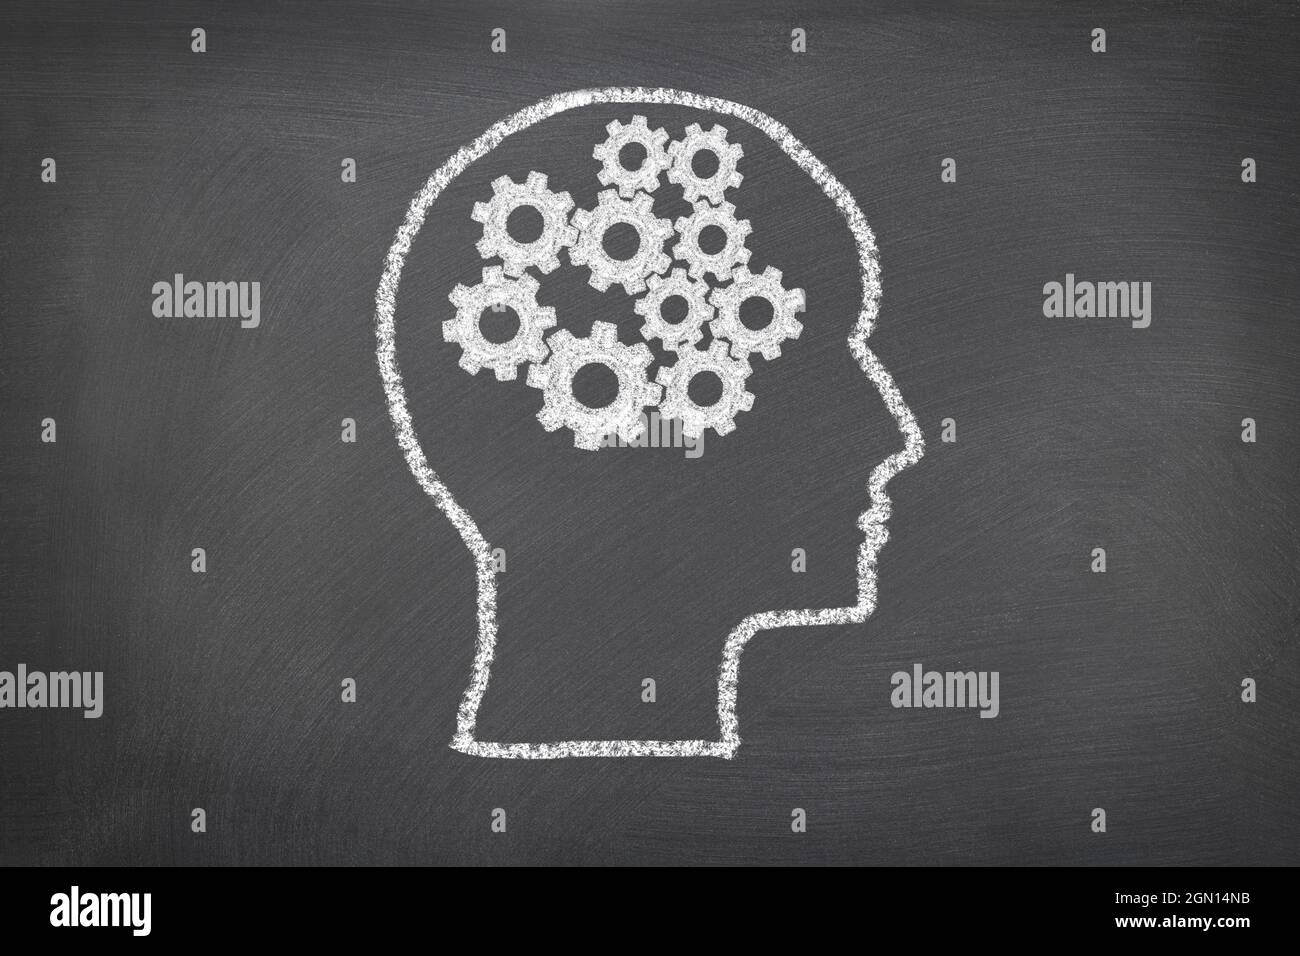 A chalk sketch on a blackboard of a human head and gears that represent thought, for use as any science theme or consideration of how humans think. Stock Photo